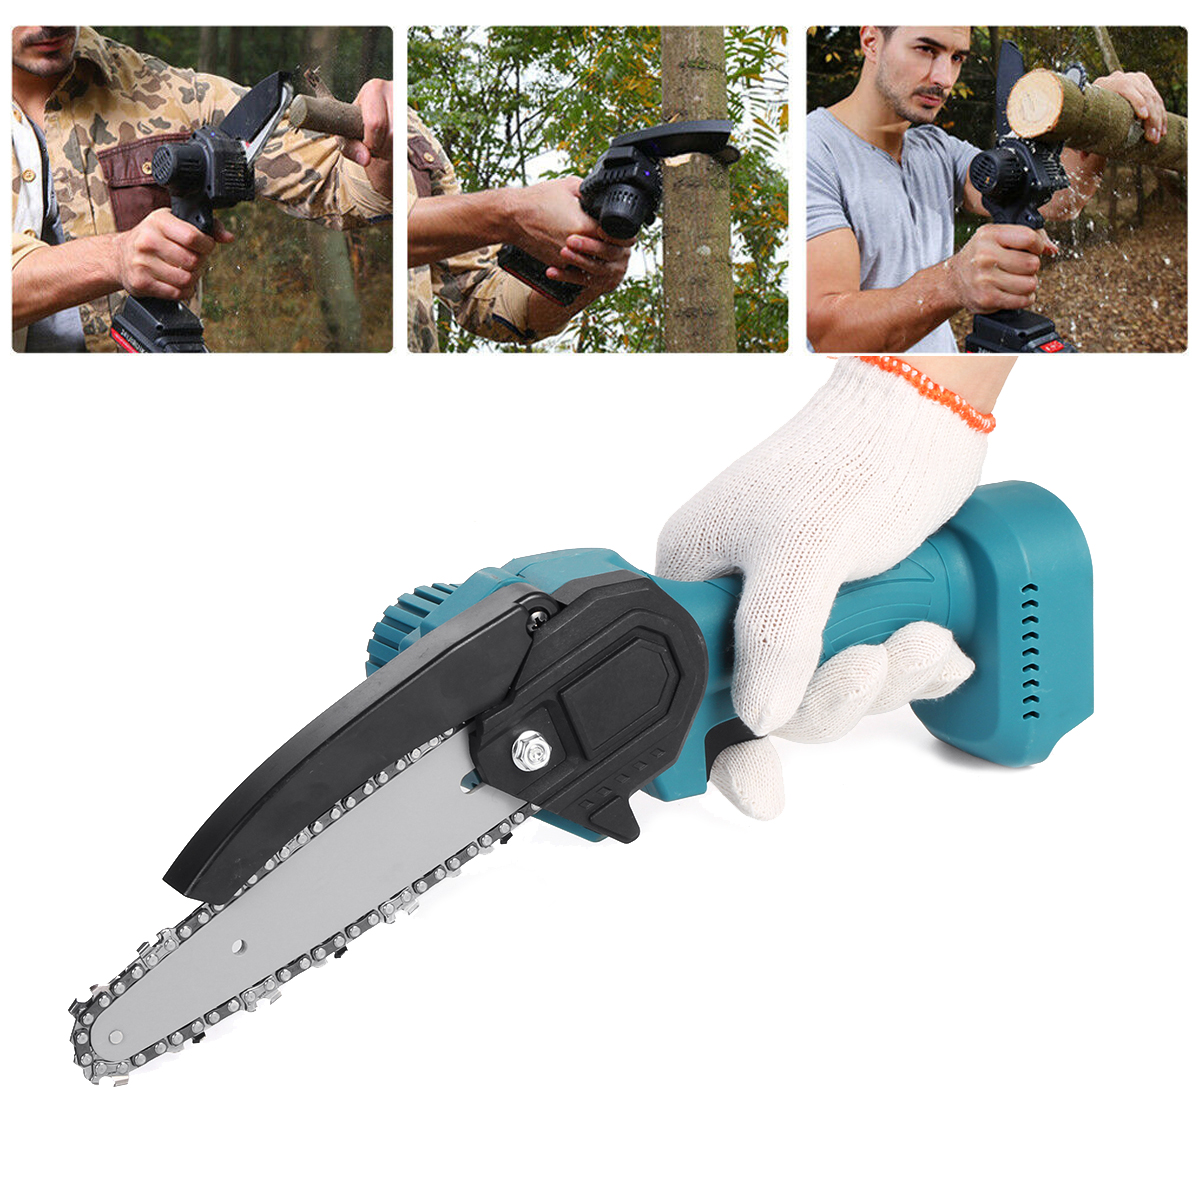 6-Inch-Mini-Electric-Chain-Saw-Rechargeable-Woodworking-Chainsaw-Garden-Power-Tools-1893524-3